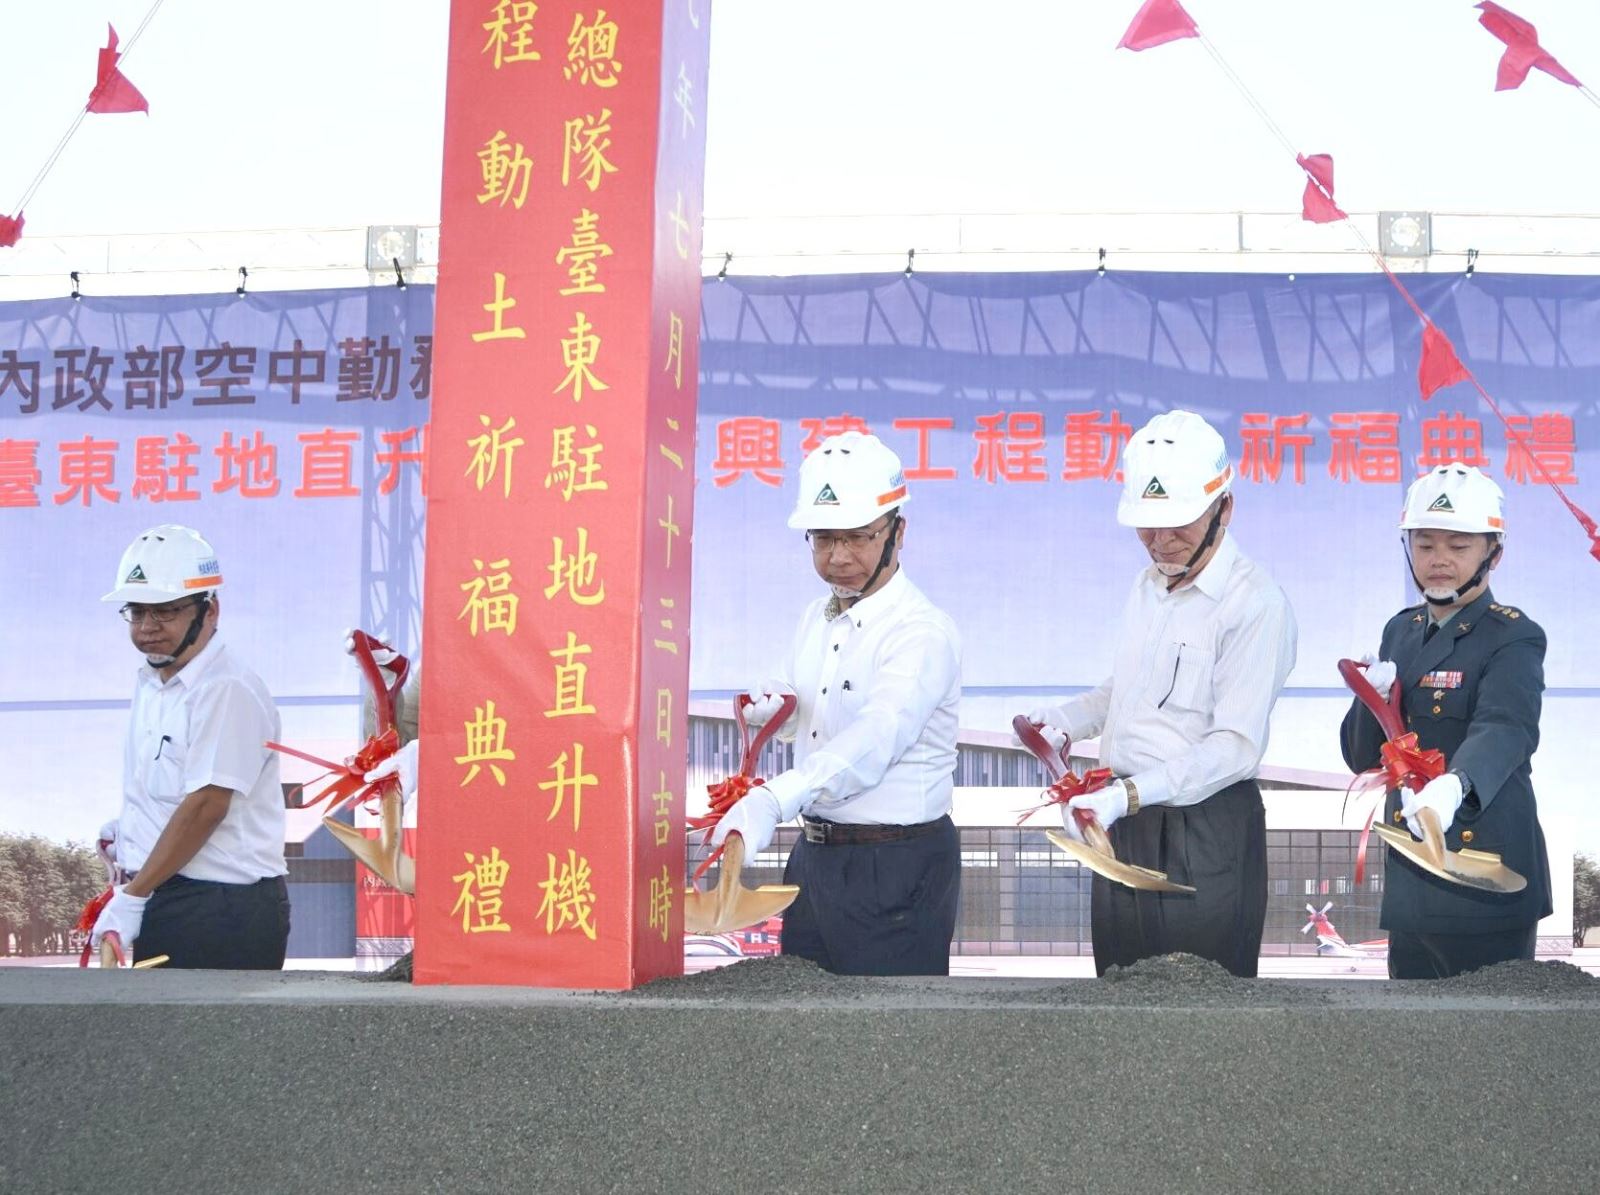 Minister Hsu and VIP guests conduct groundbreaking ceremony